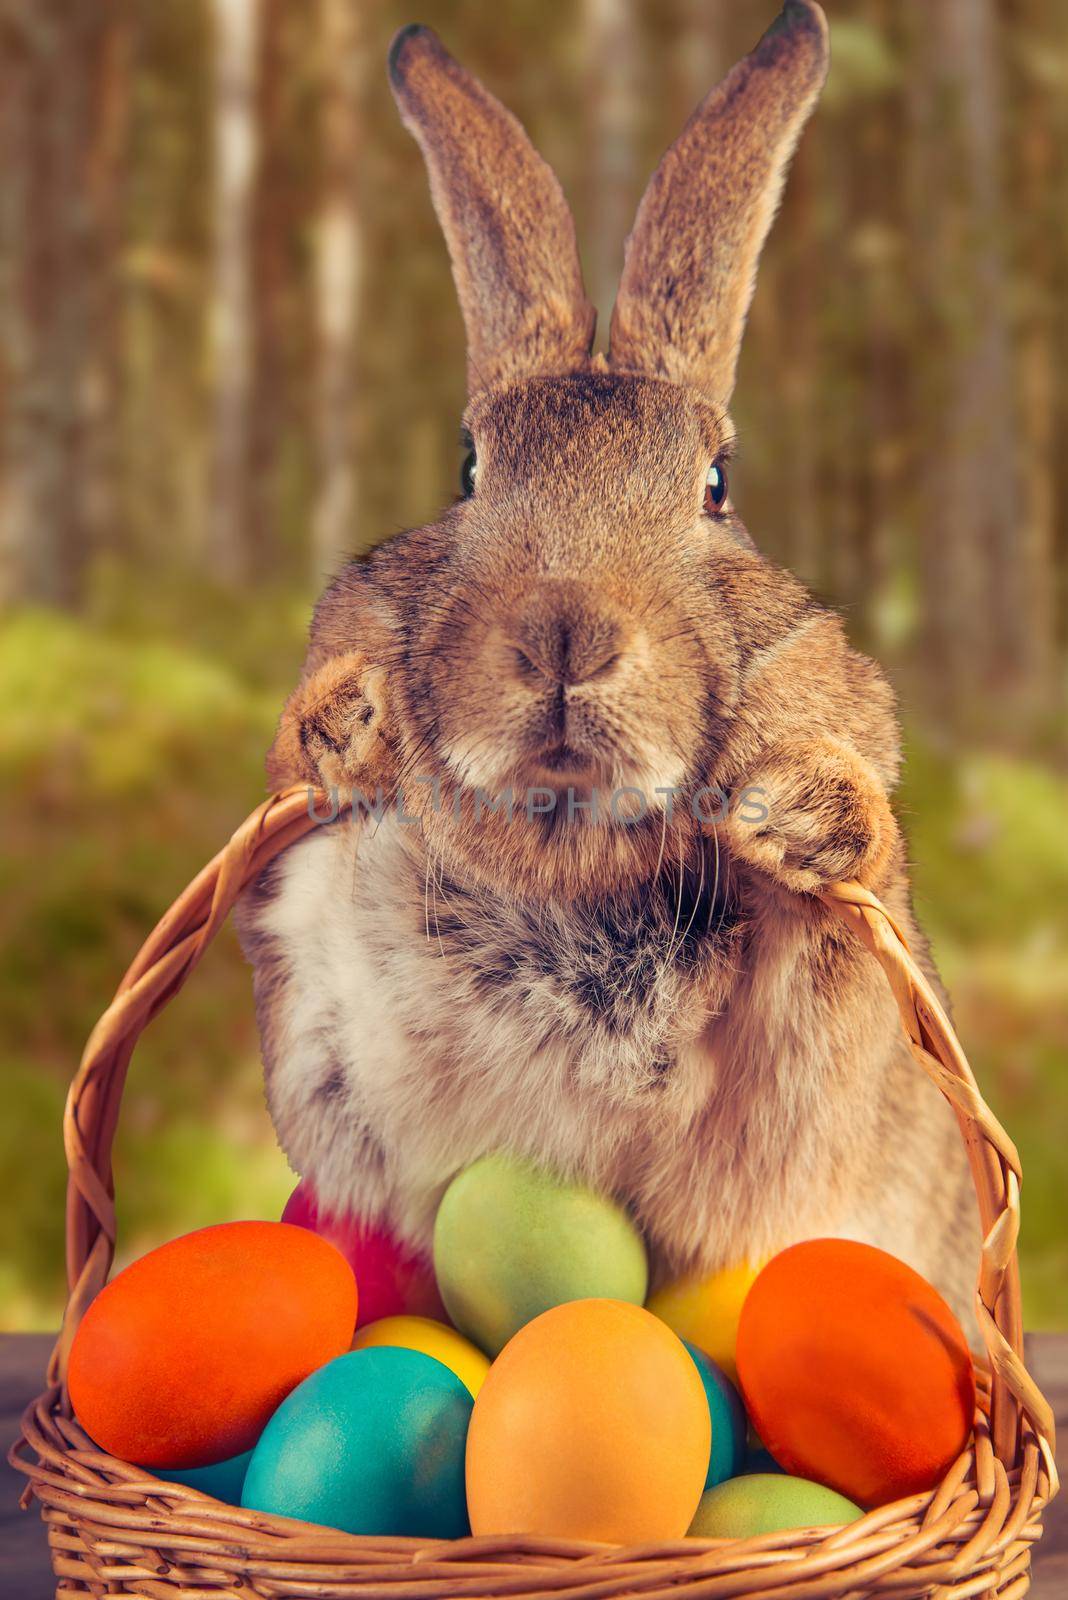 Brown Easter rabbit holds basket with colored eggs on a wooden table outdoor